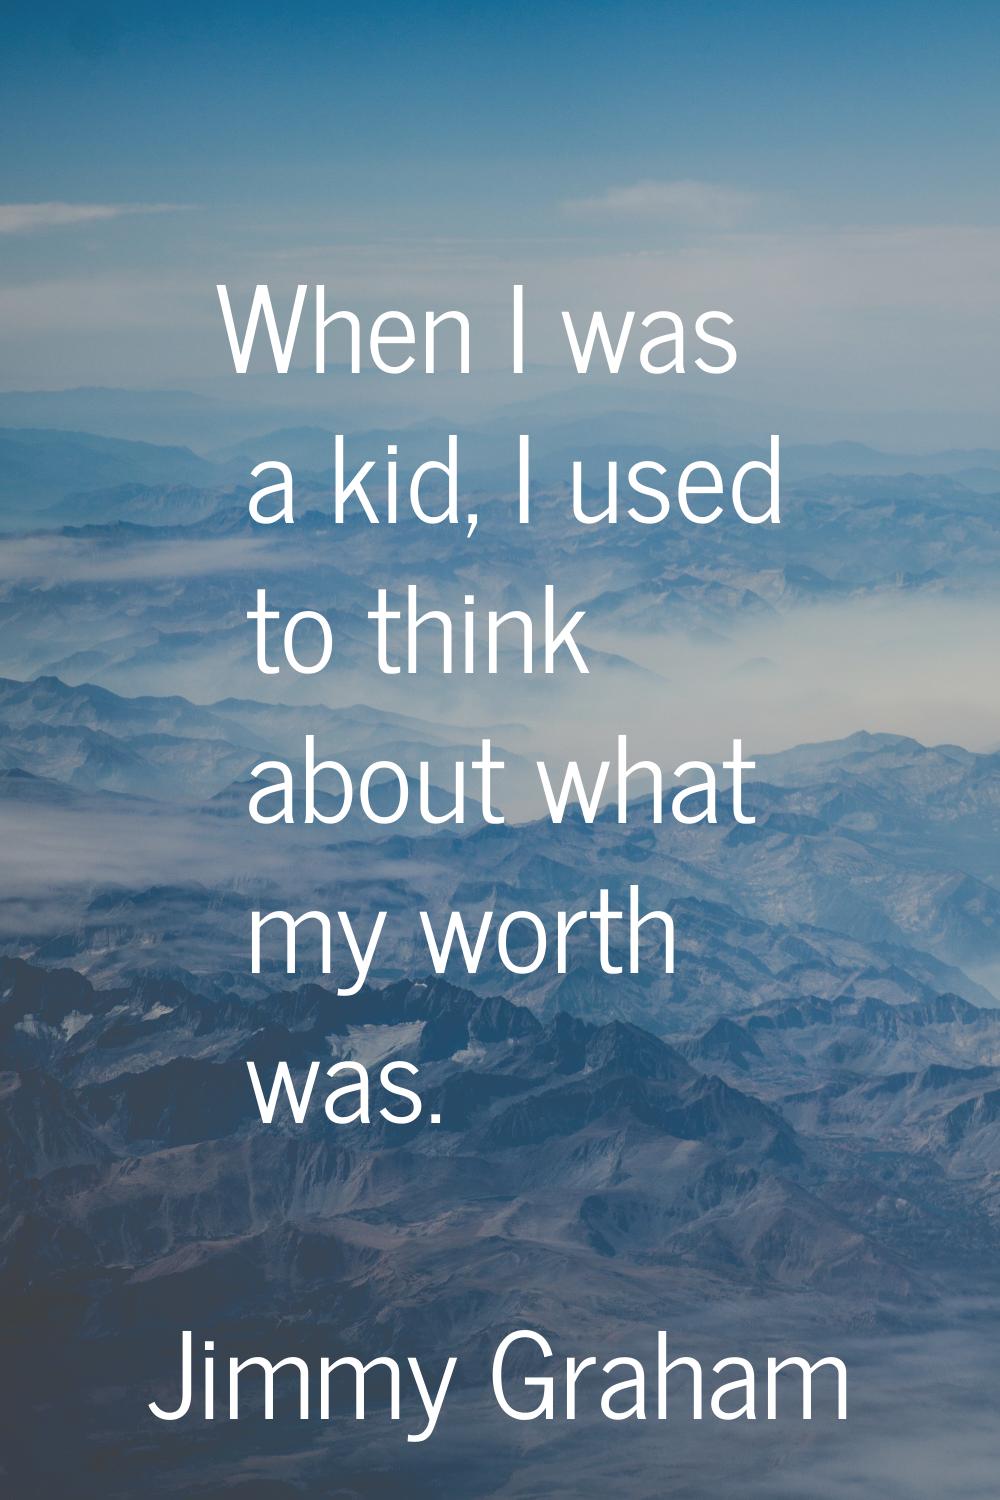 When I was a kid, I used to think about what my worth was.